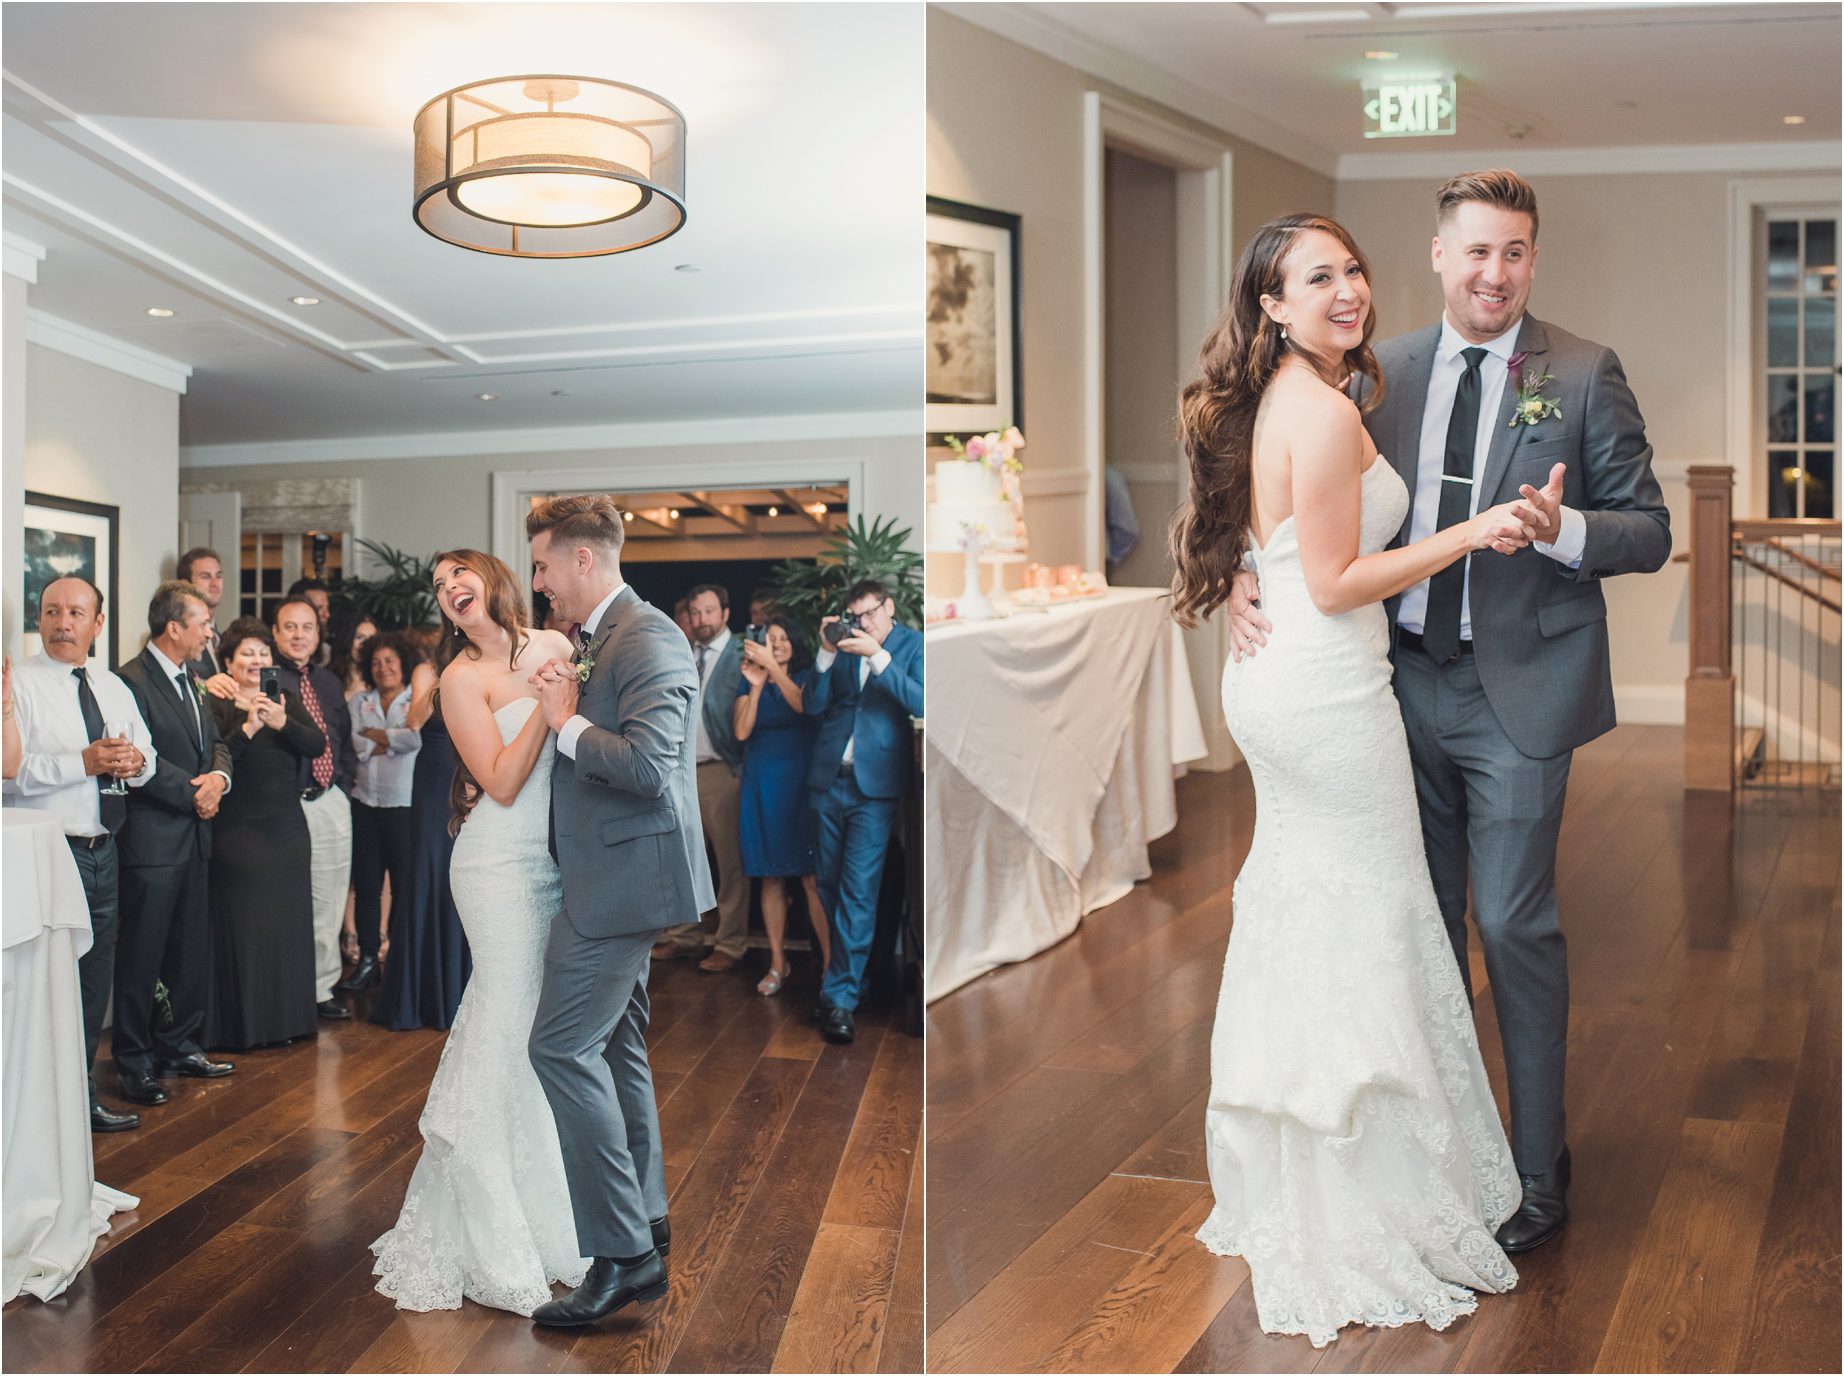 A bride and groom have their first dance at the belmond el encanto